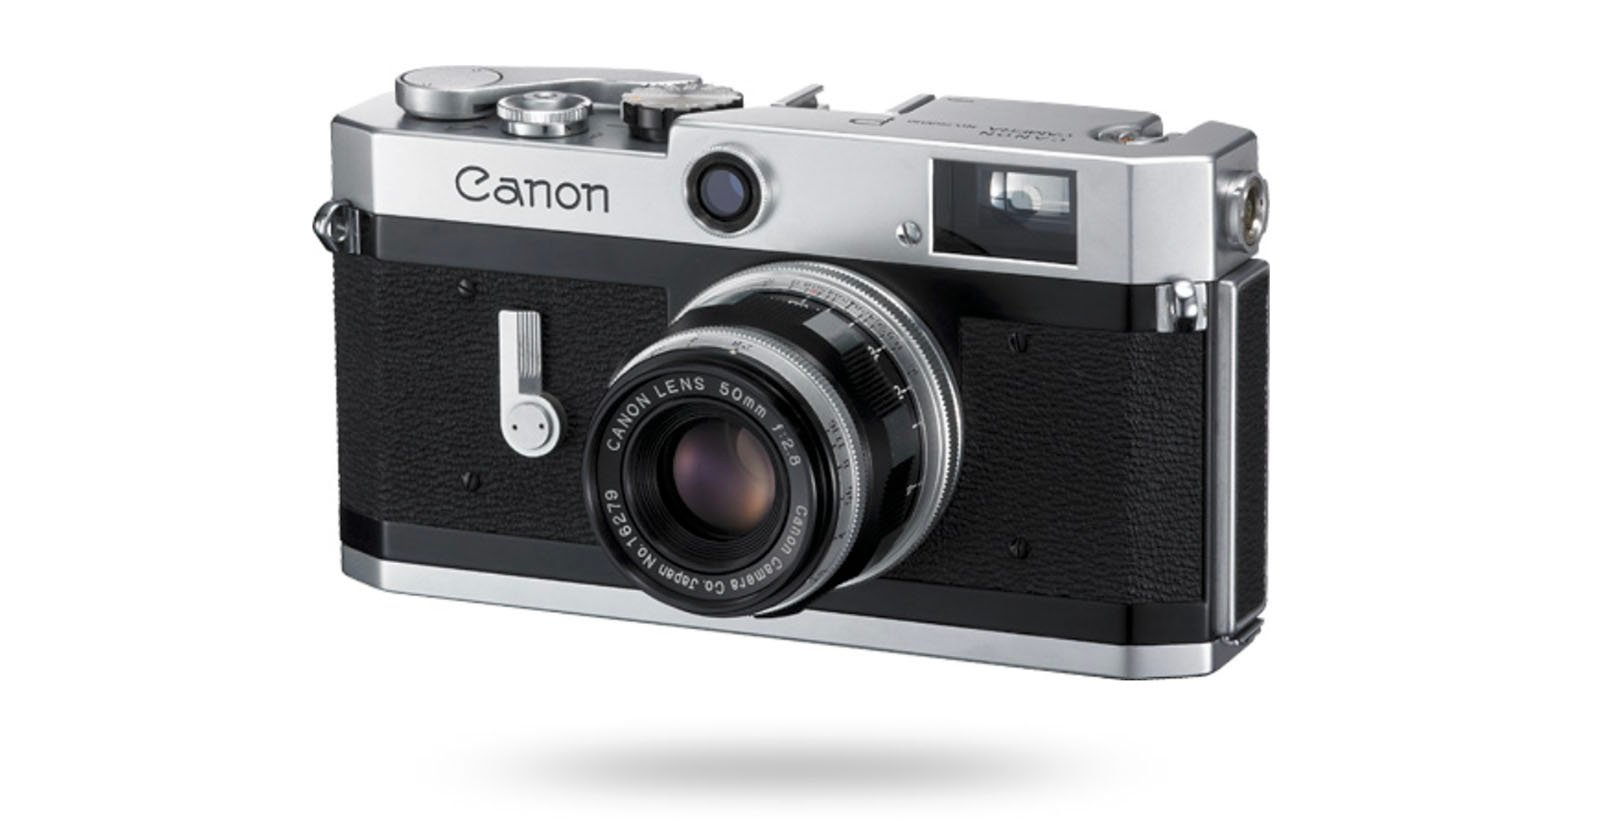 Canon is Considering Making a Retro-Inspired Digital Camera: Report